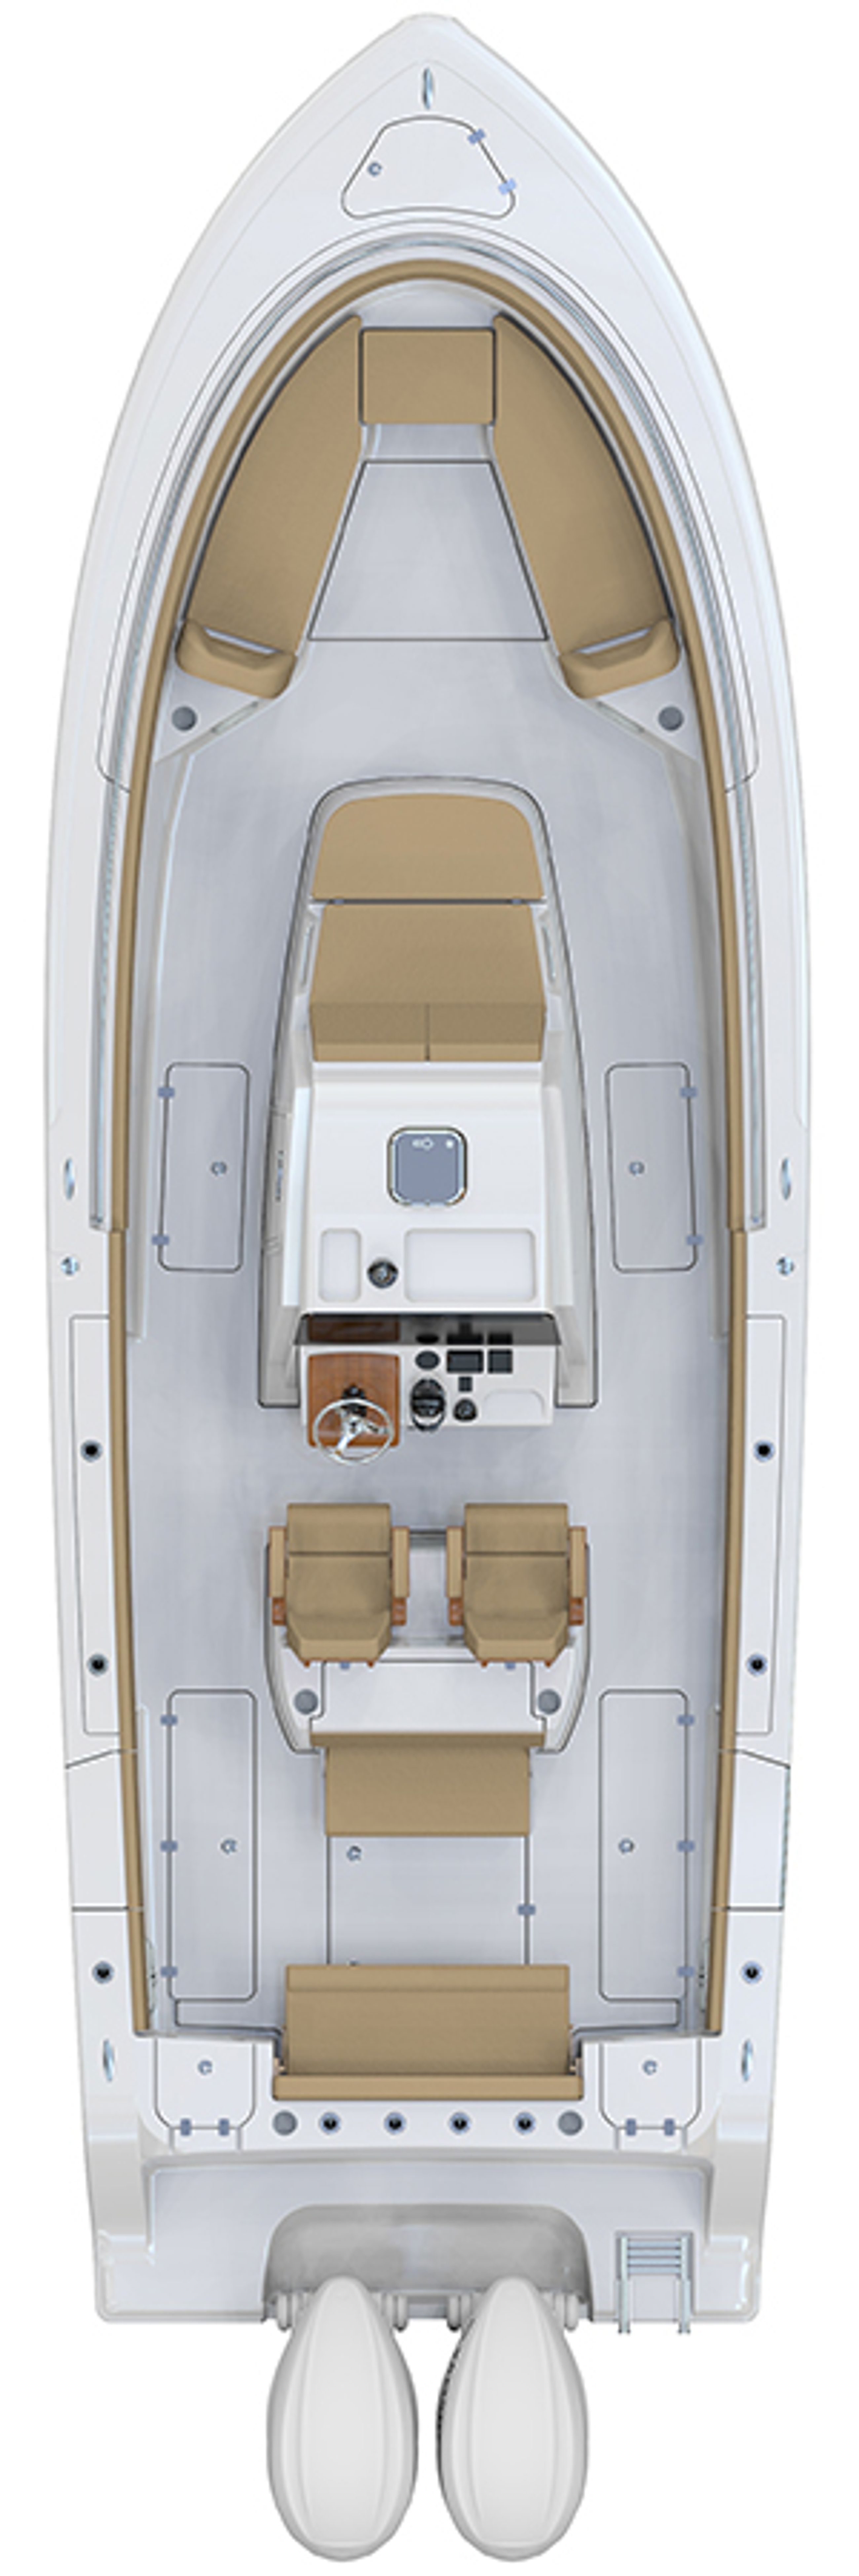 Overhead image of the 322-center-console